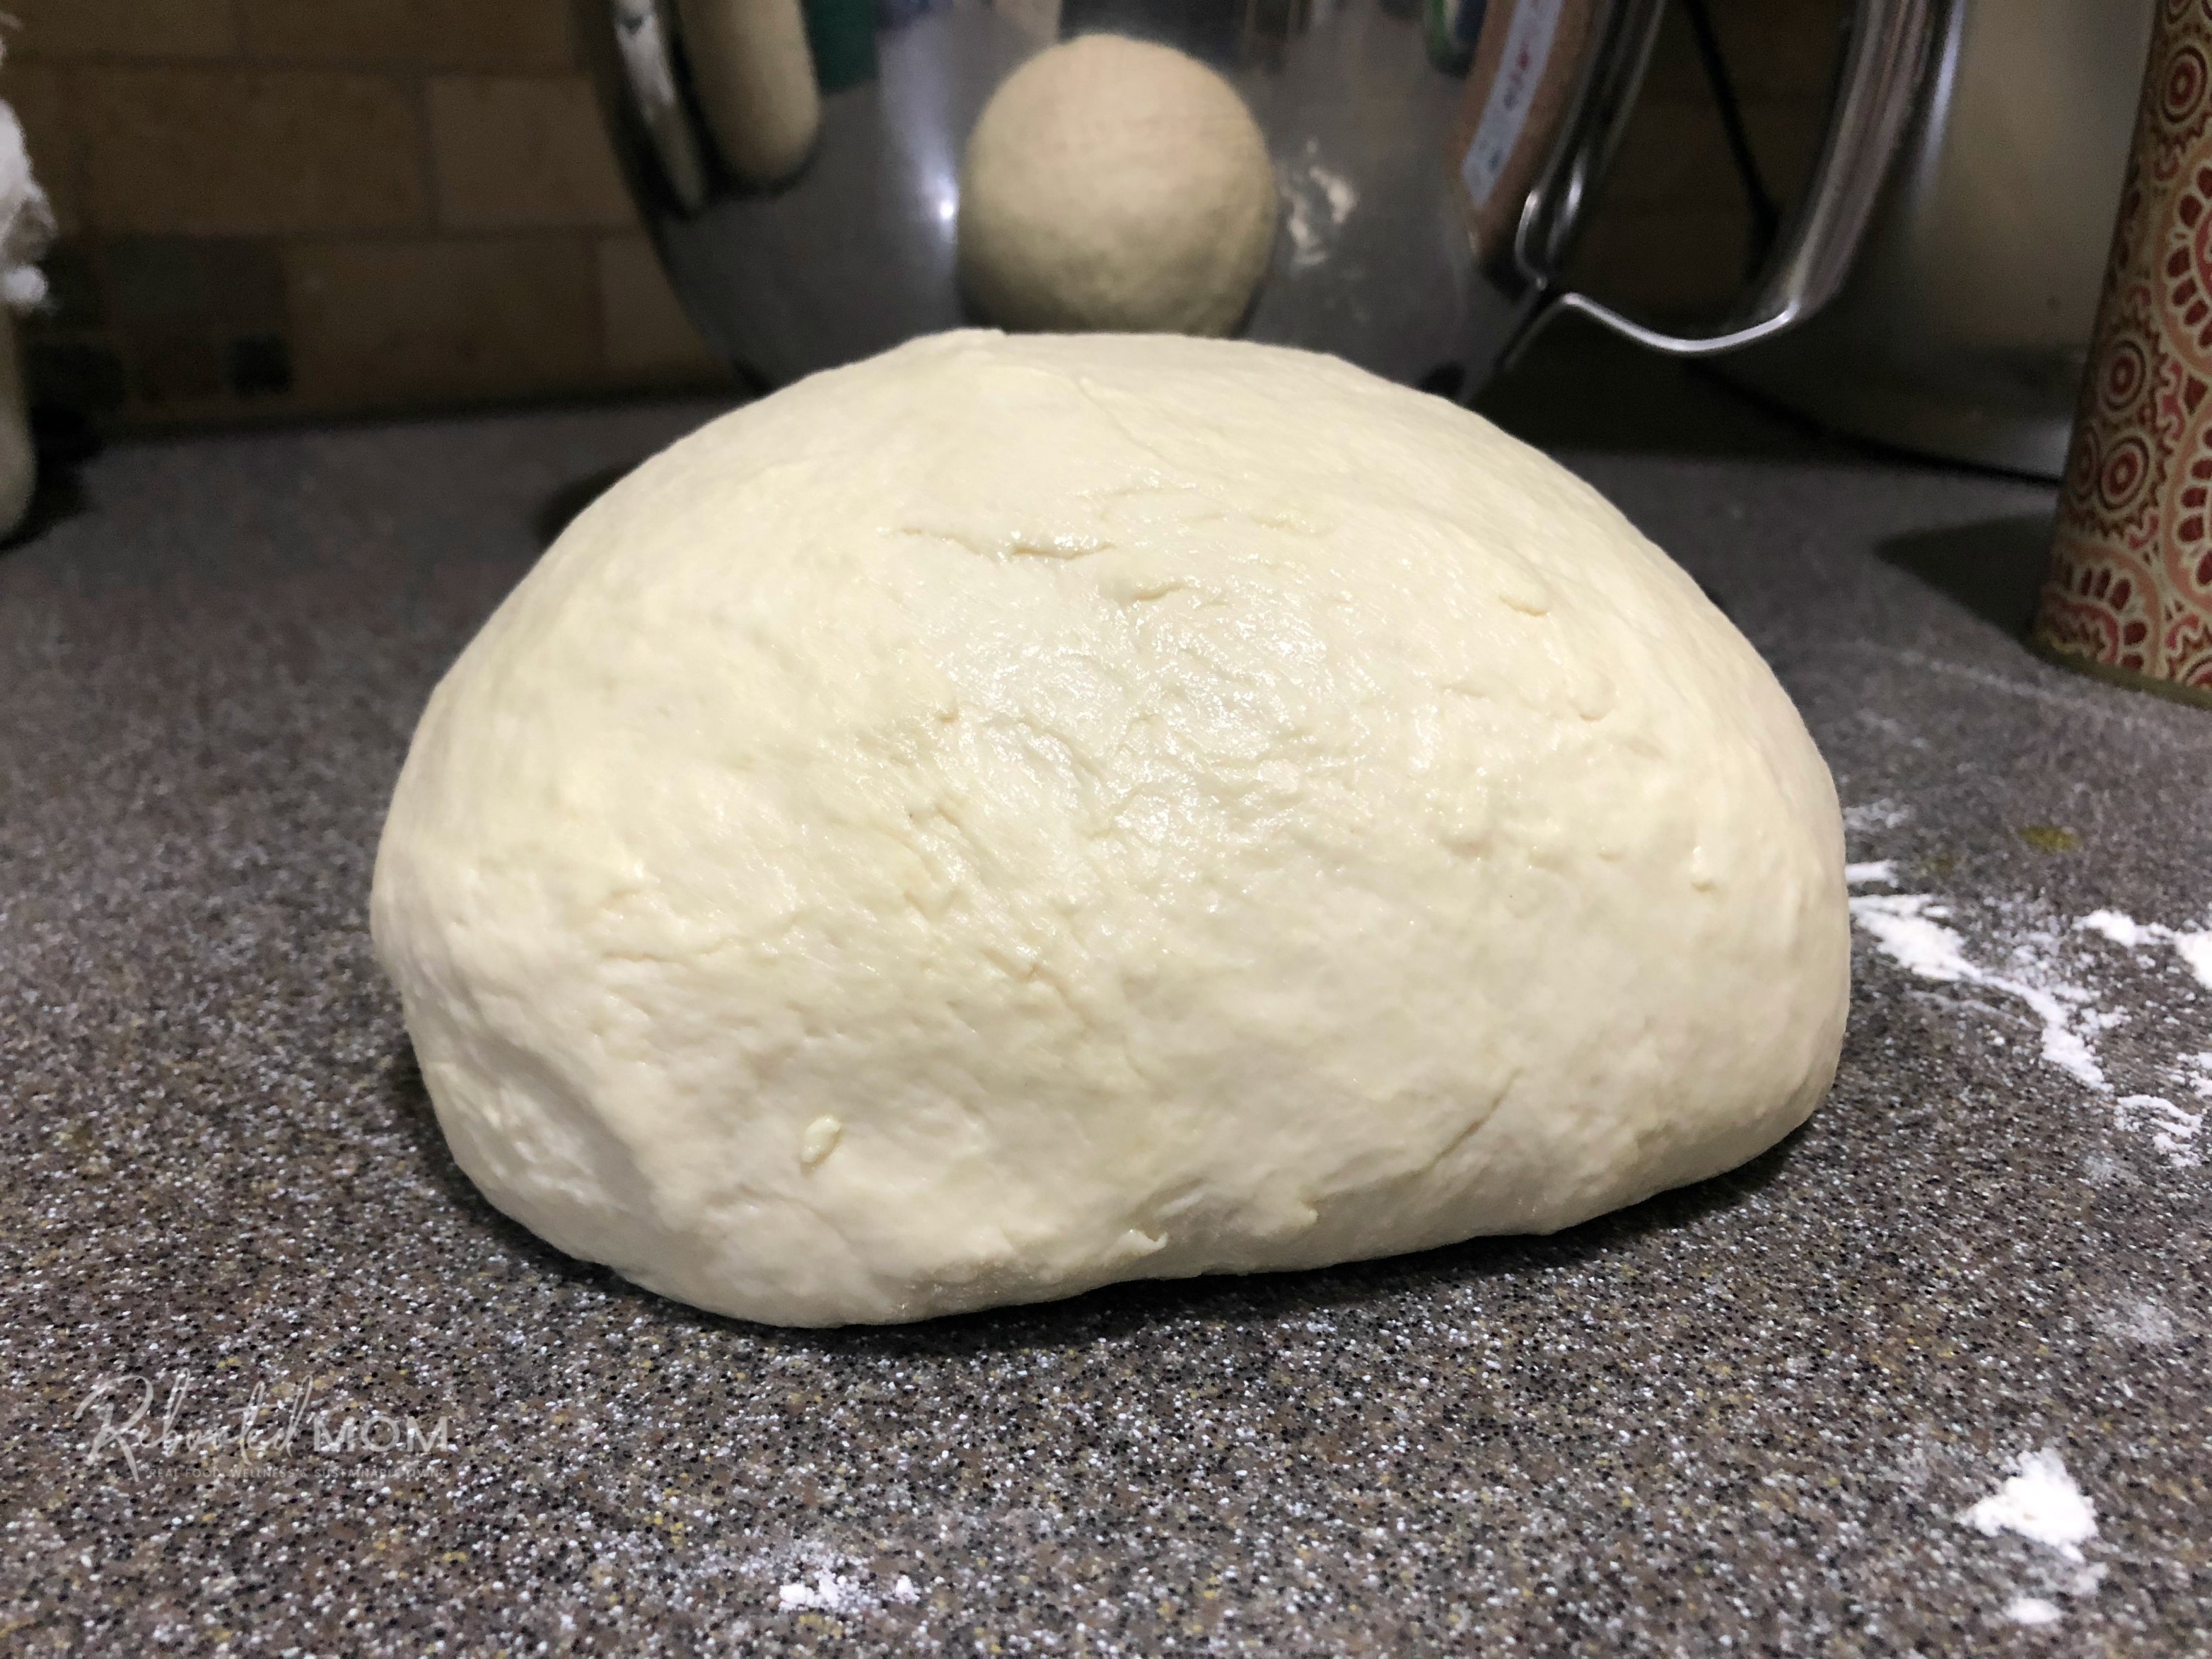 Ball of sourdough before rise \\ Easy homemade sourdough bagels you can make at home with your own active sourdough starter. This step by step tutorial makes the most delicious bagels!